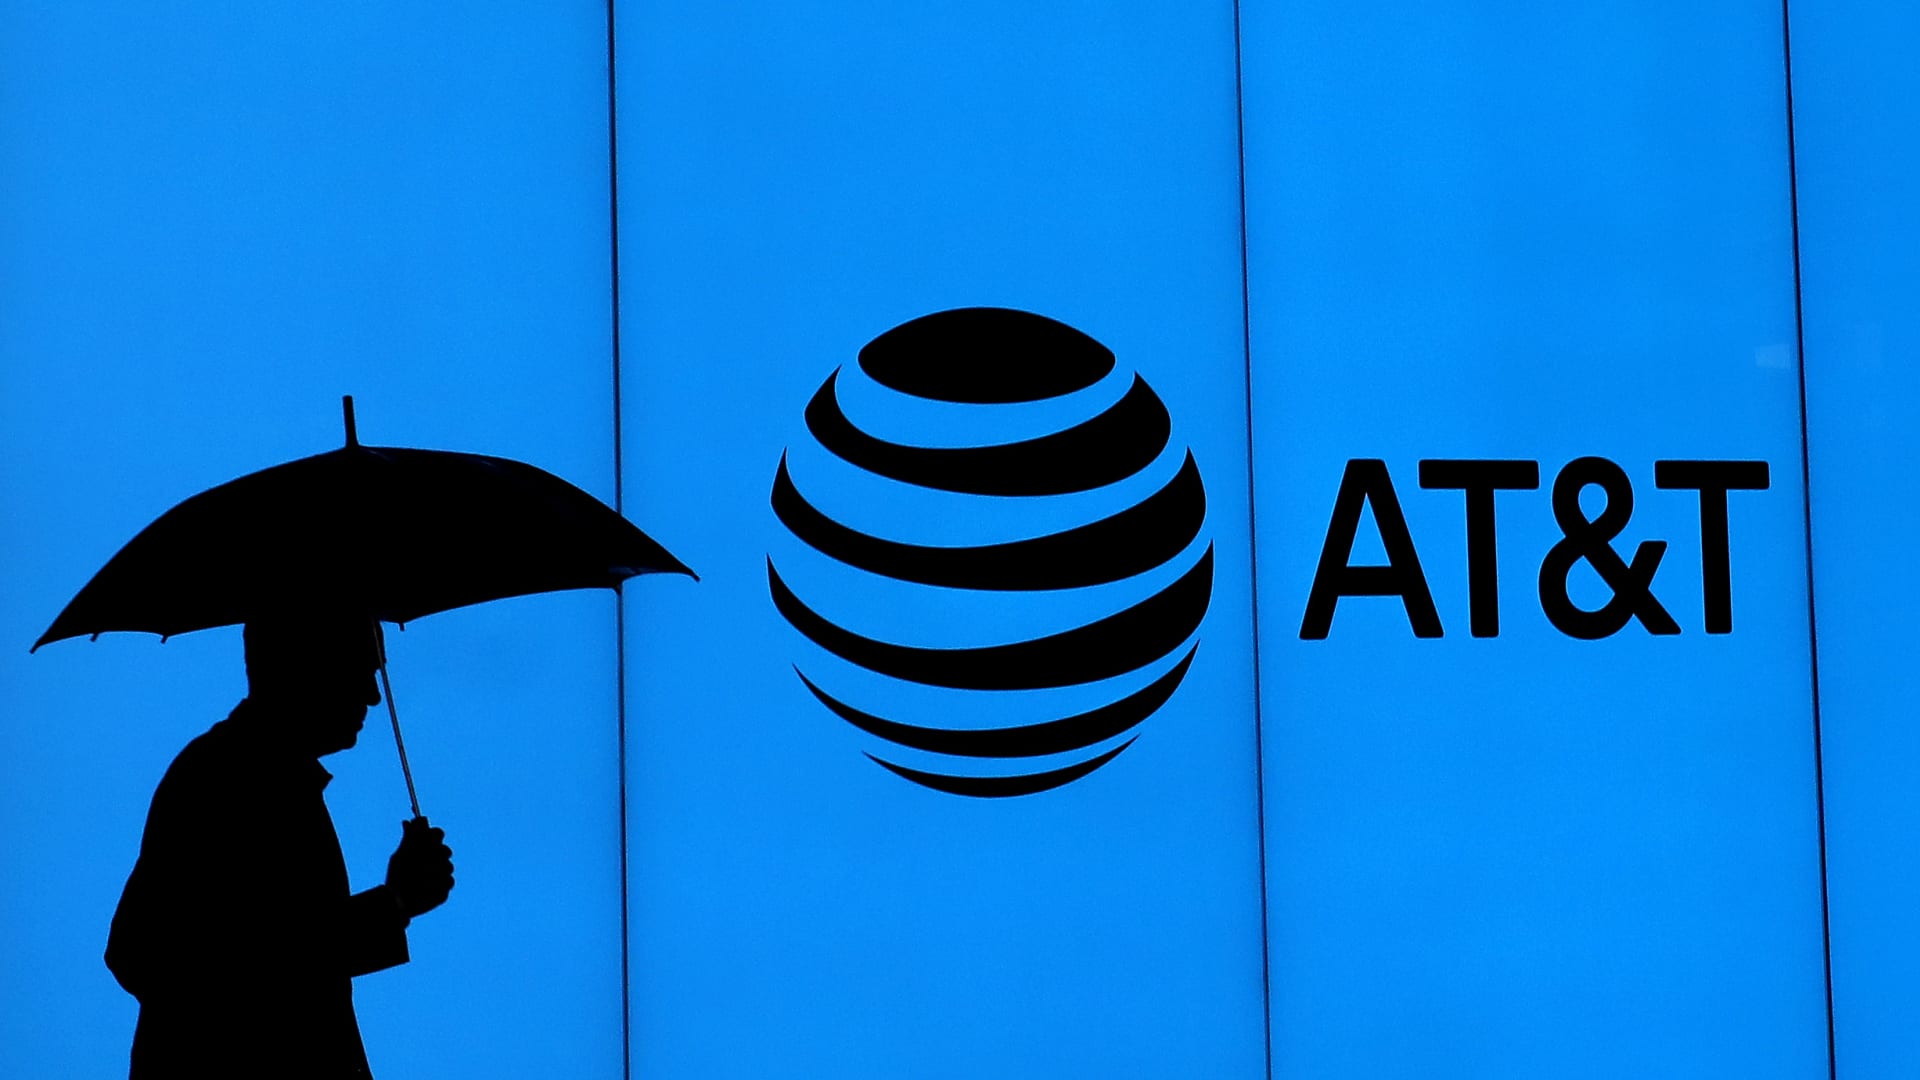 AT&T shares fall after results show later payments, higher spending